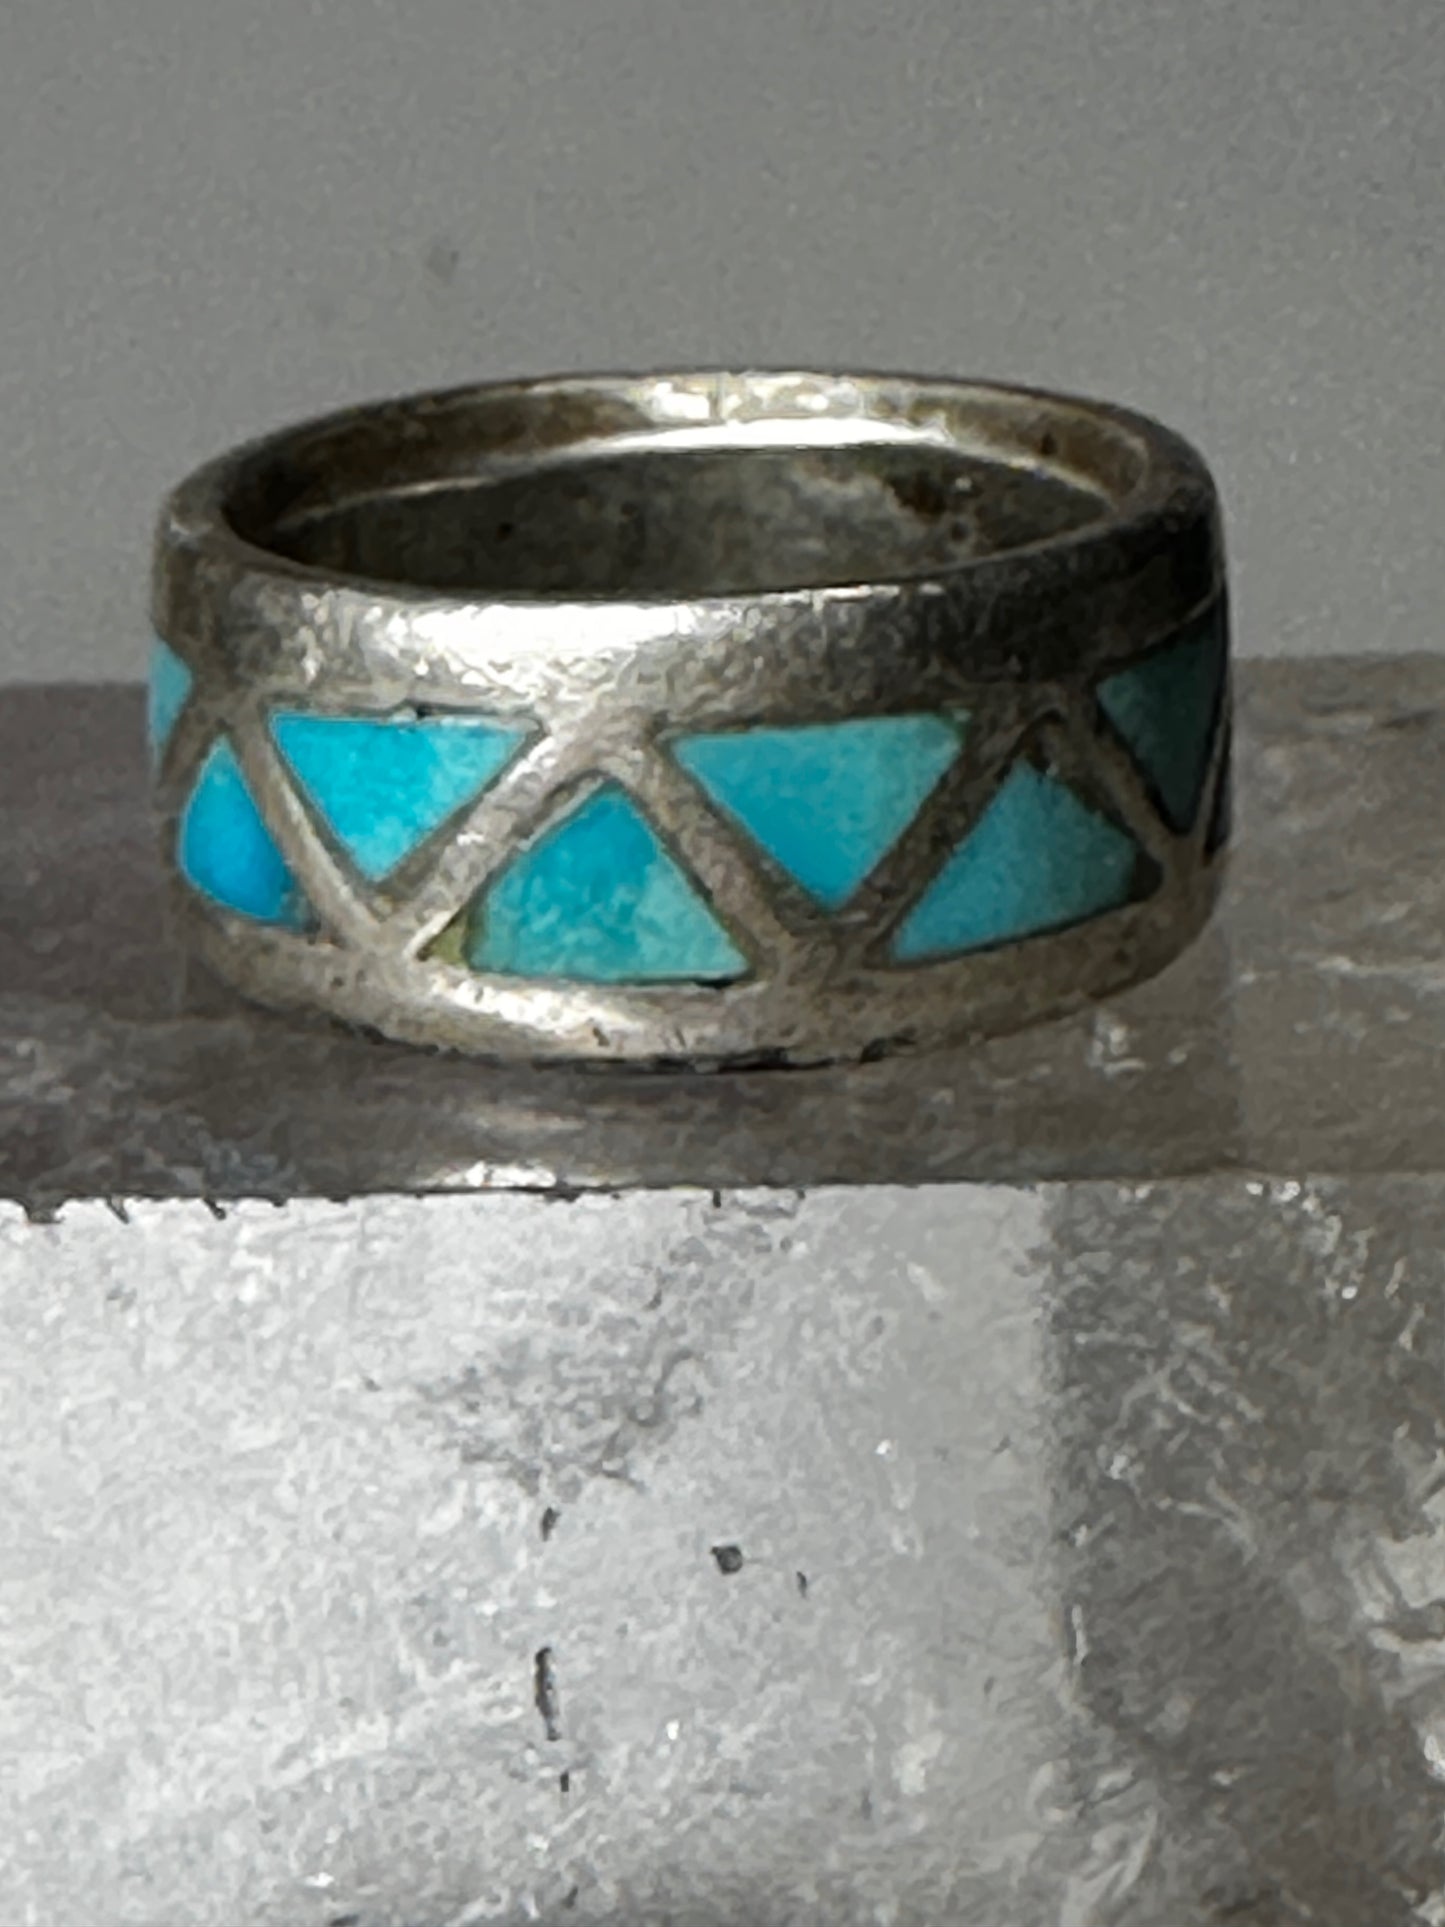 Turquoise ring size 4.25 Zuni band wedding sterling silver women